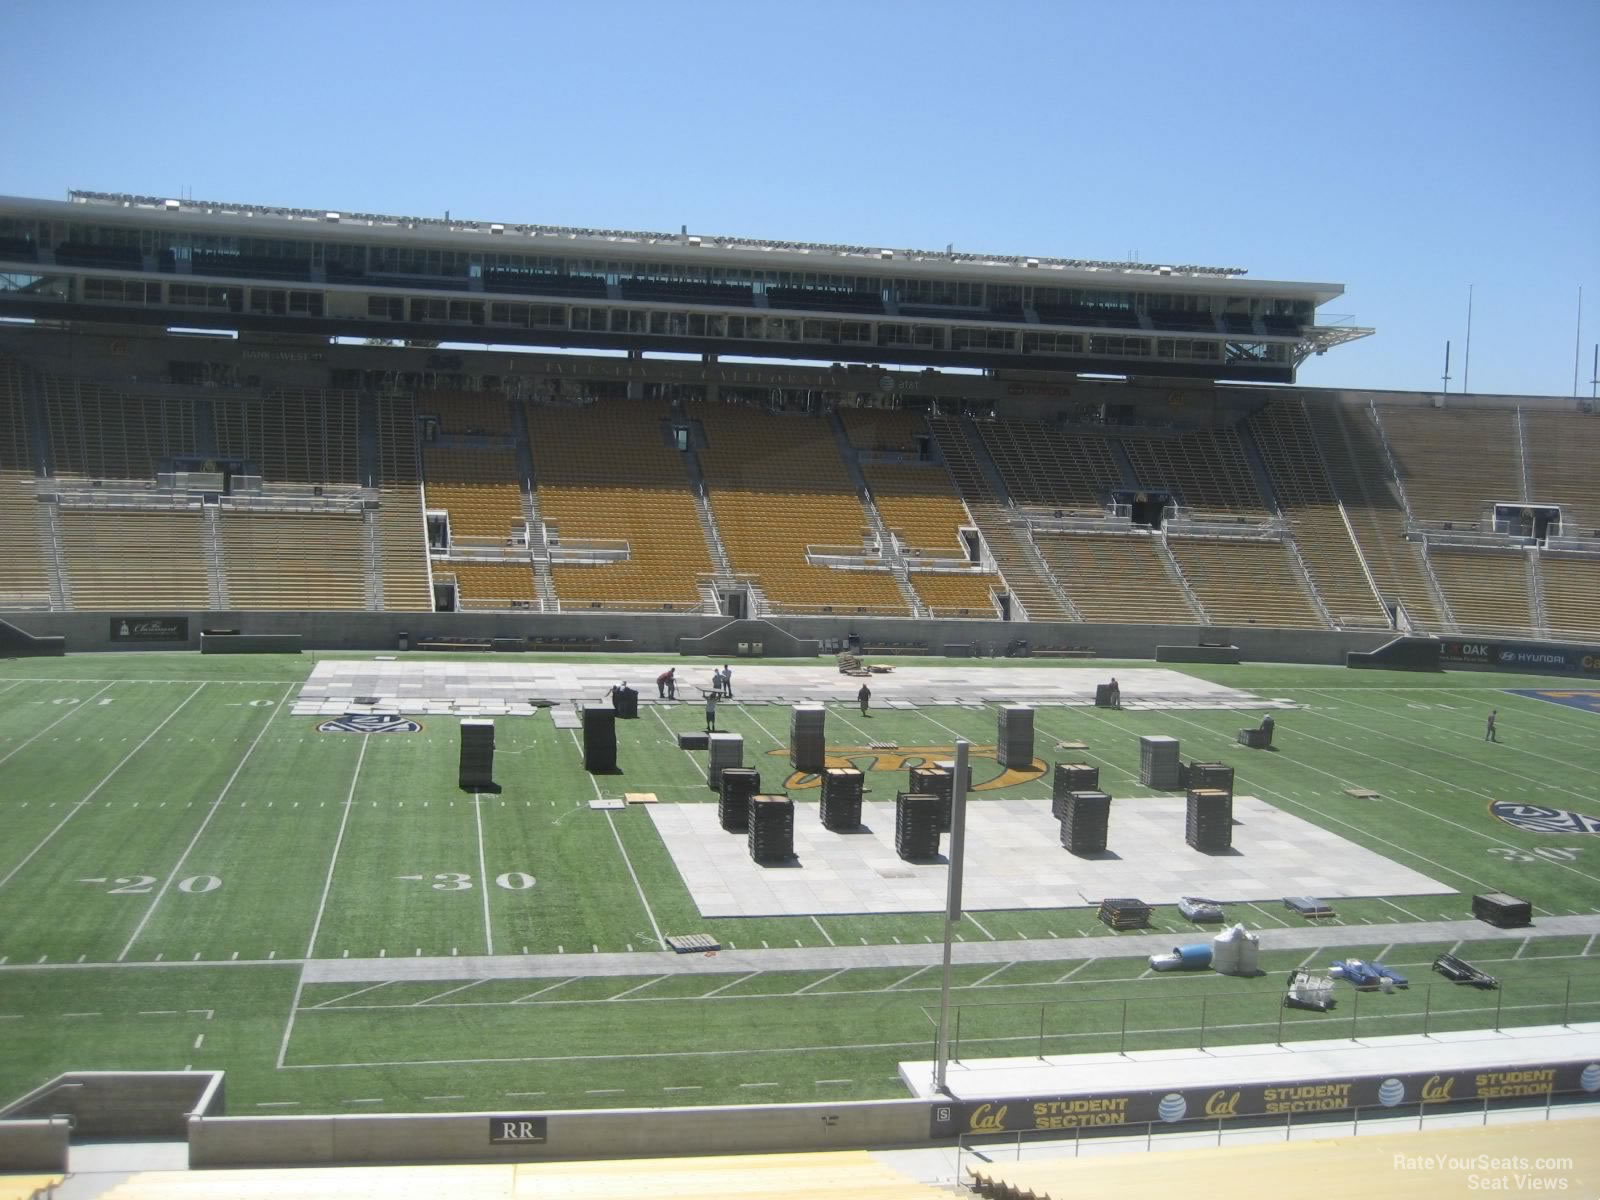 Staying out of the sun at Cal Memorial Stadium